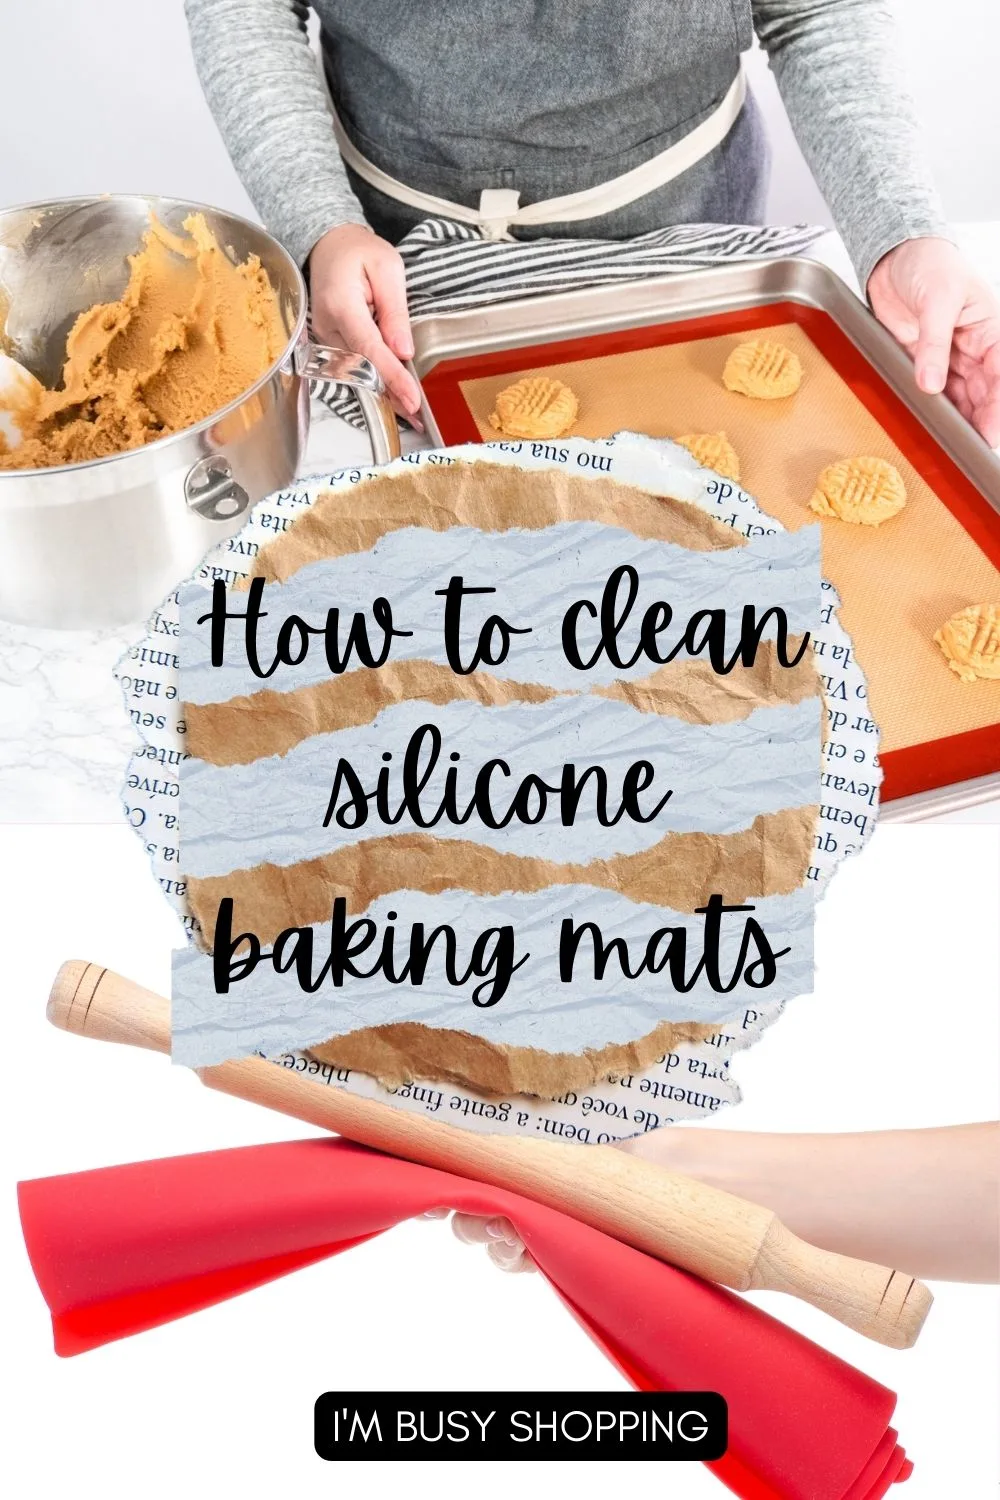 How to Clean Silicone